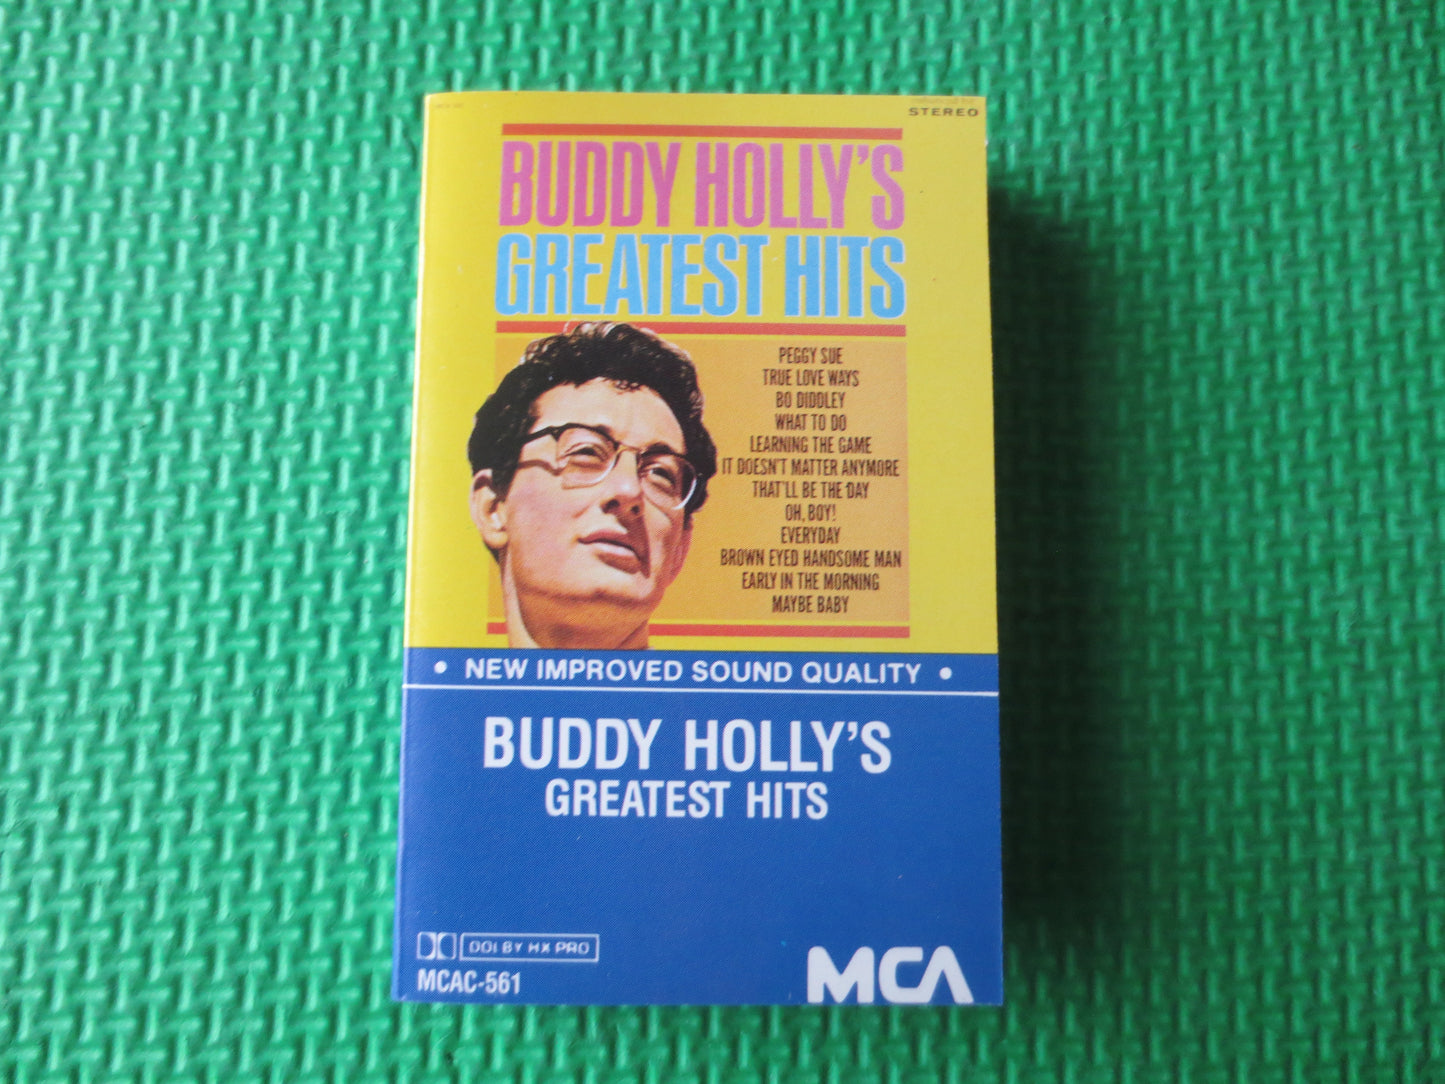 BUDDY HOLLY, GREATEST Hits, Buddy Holly Cassette, Buddy Holly Tape, Tape Cassette, Music Cassette, Pop Tapes, 1985 Cassette